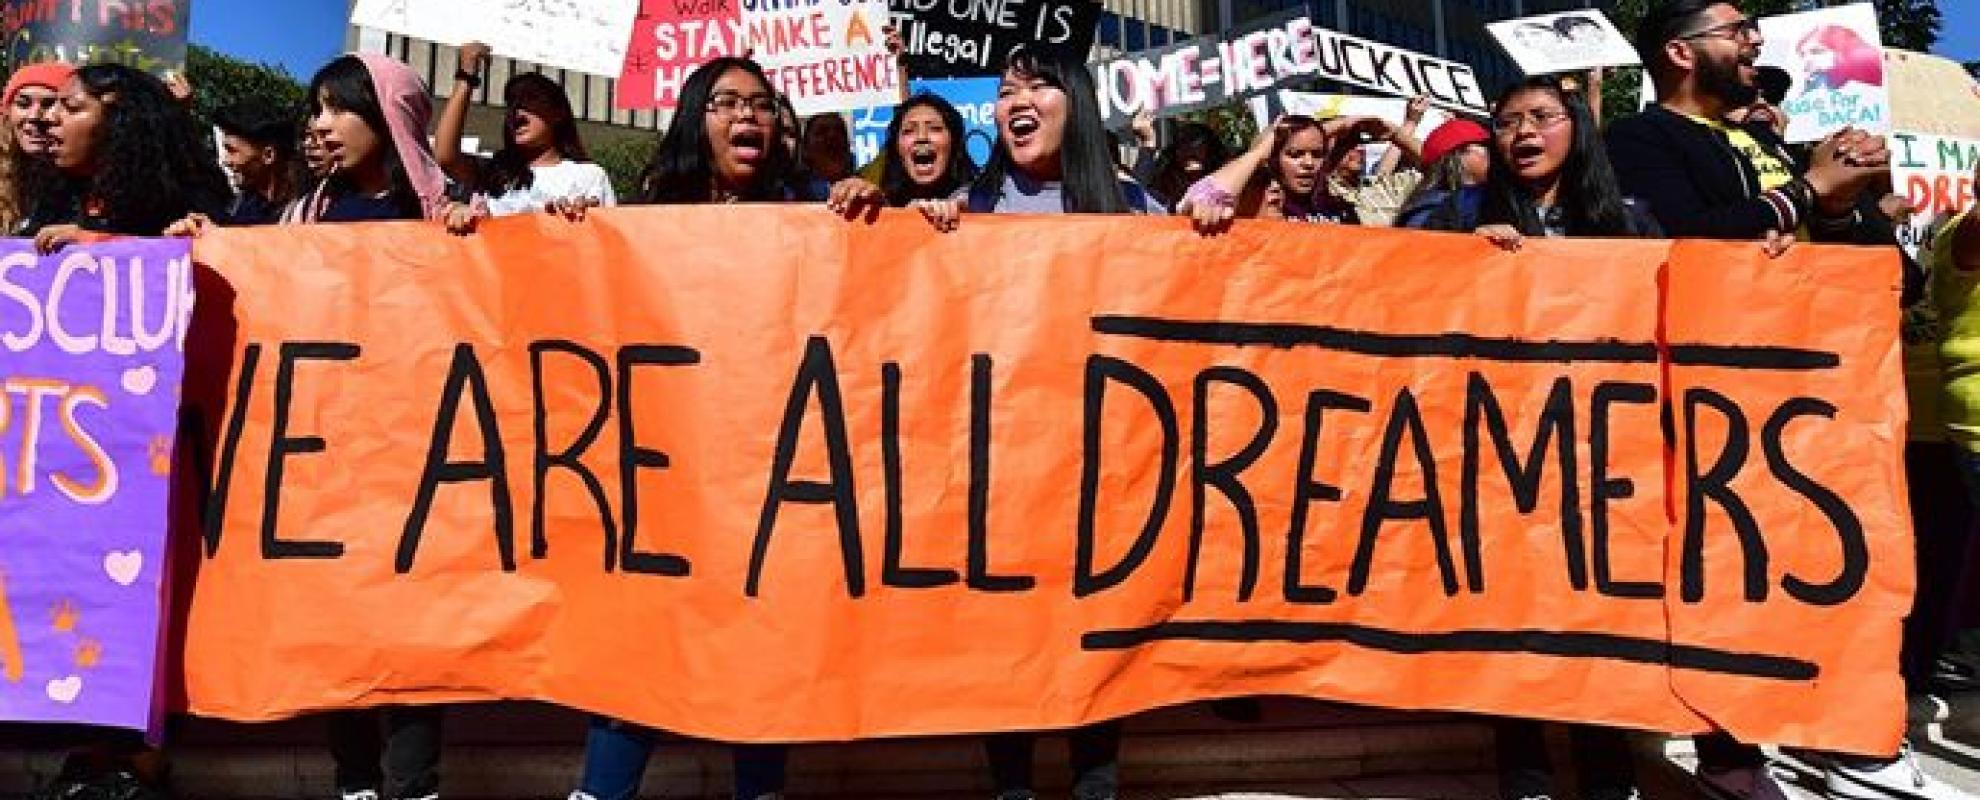 Banner We are all dreamers